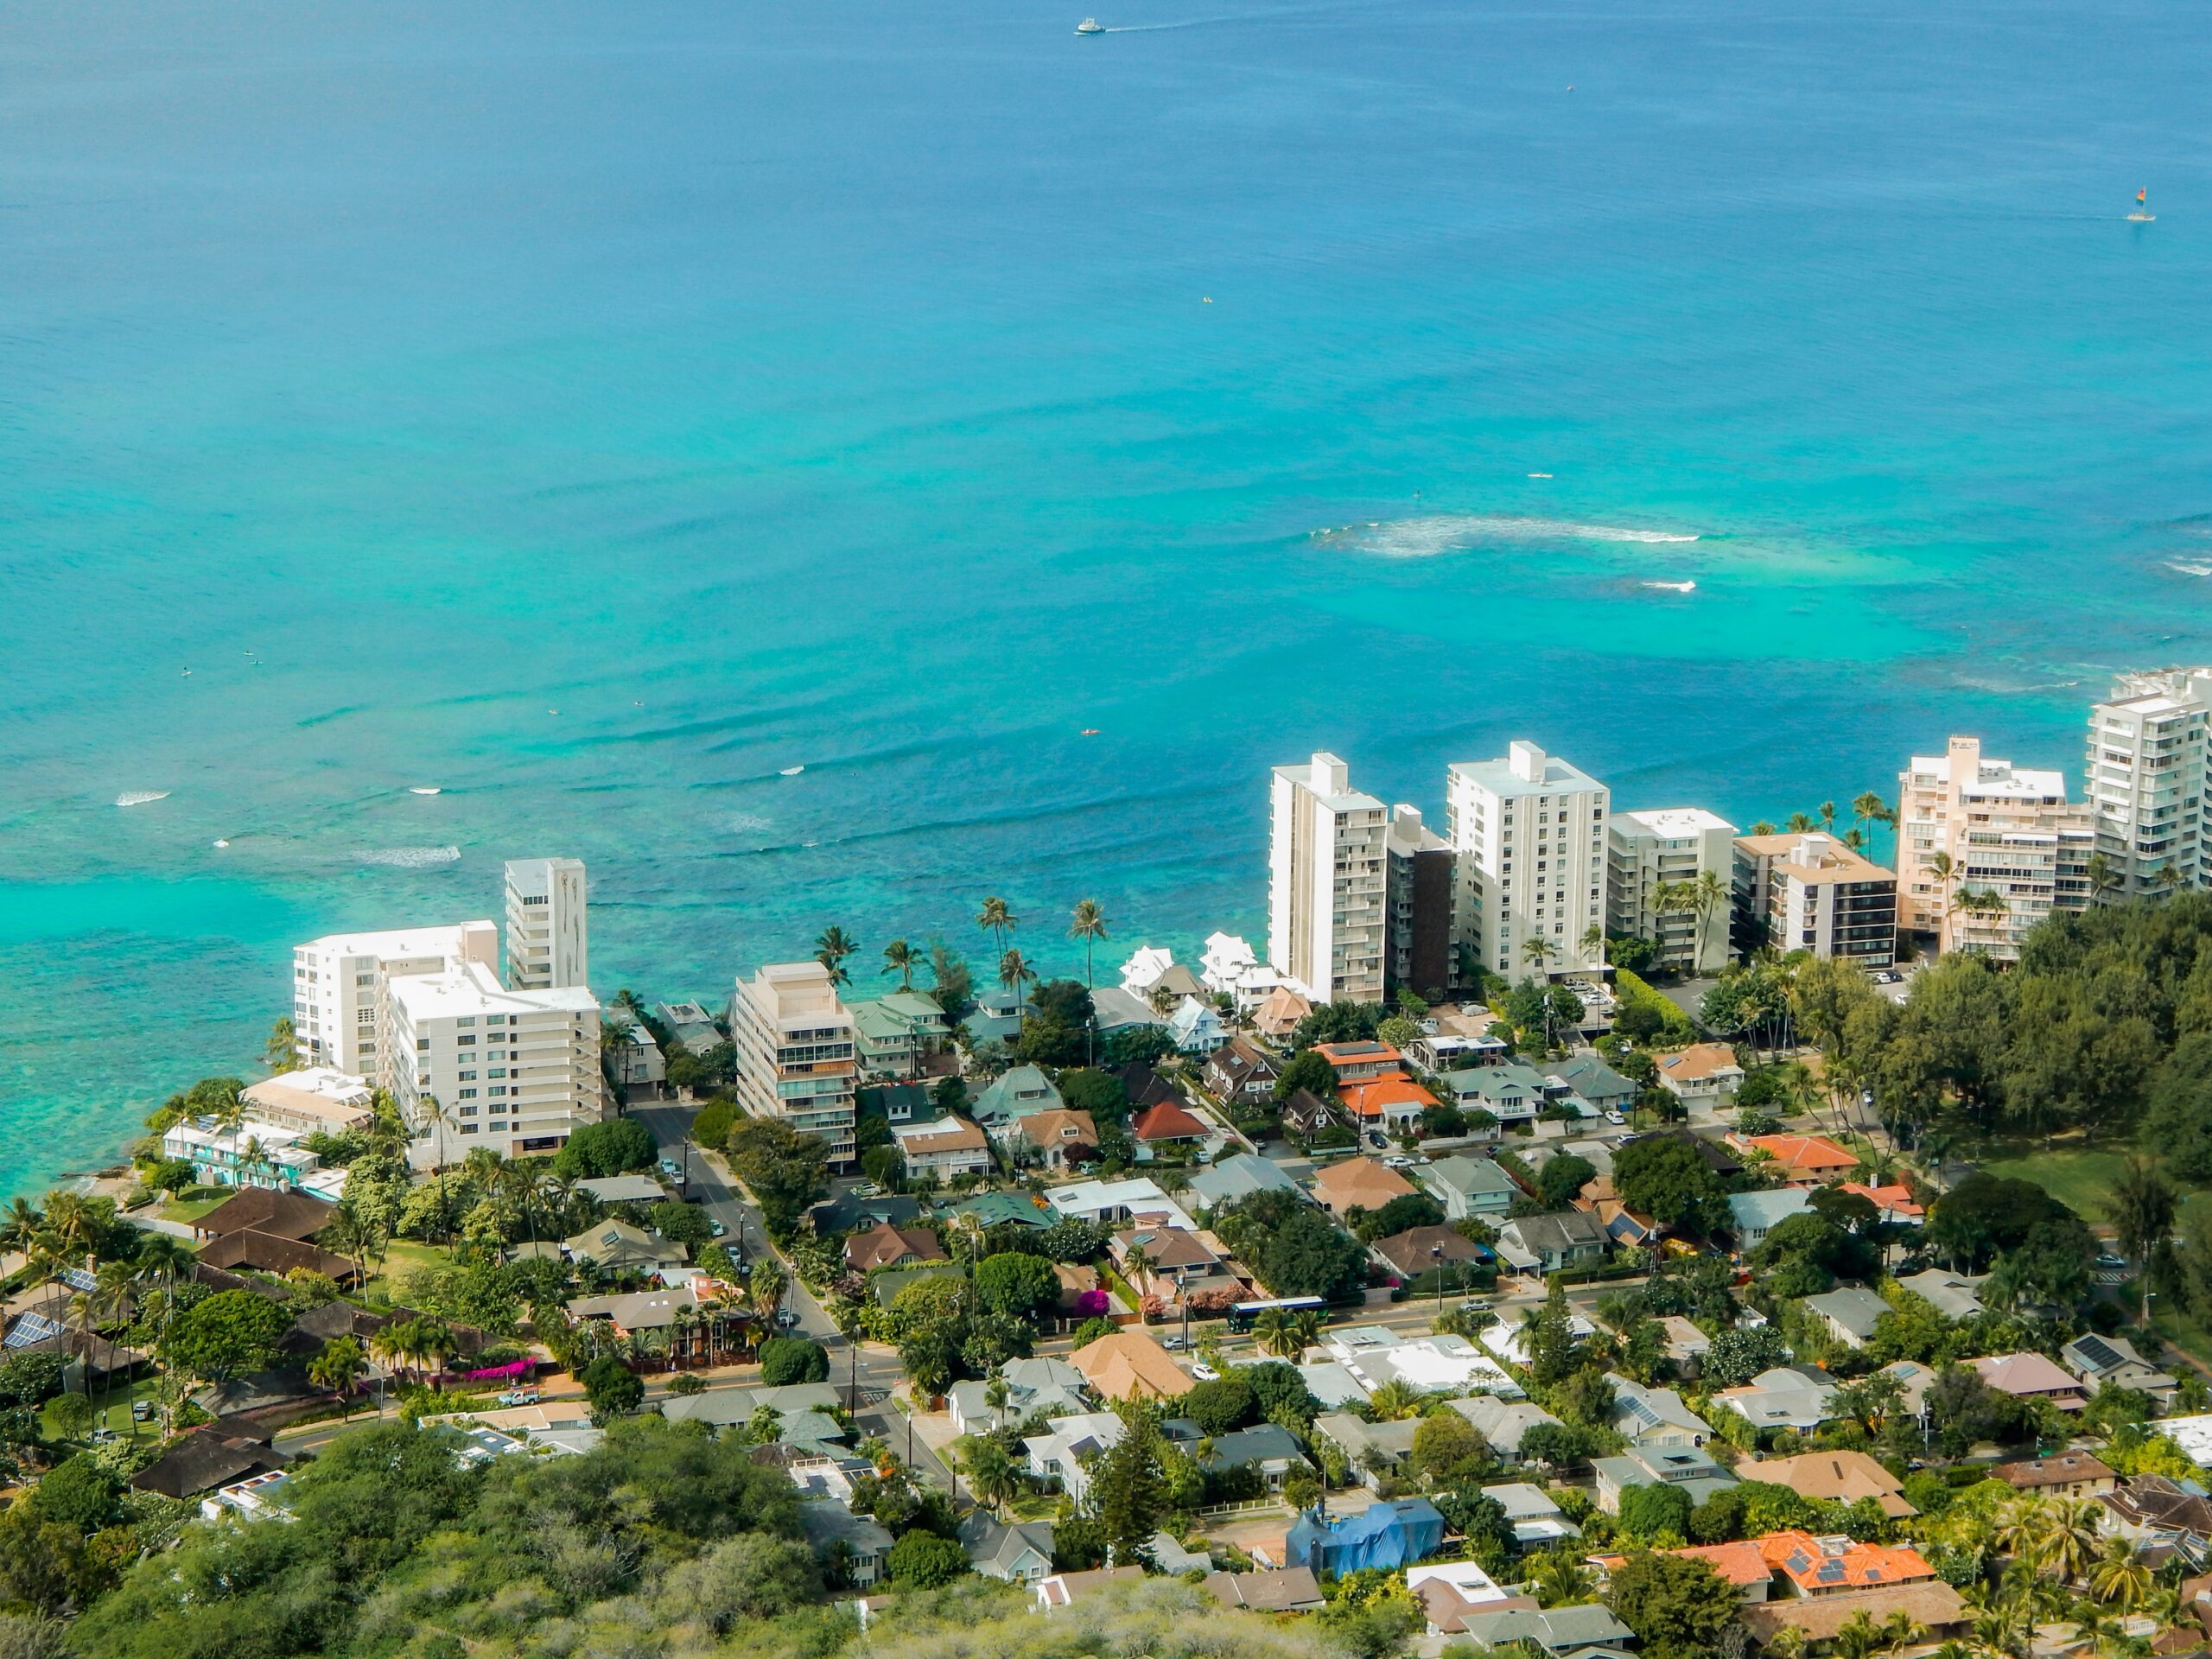 These popular islands are some of the best places to visit will in Hawaii. 
Pictured: a Hawaiian metropolitan city  with seaside resorts and homes 